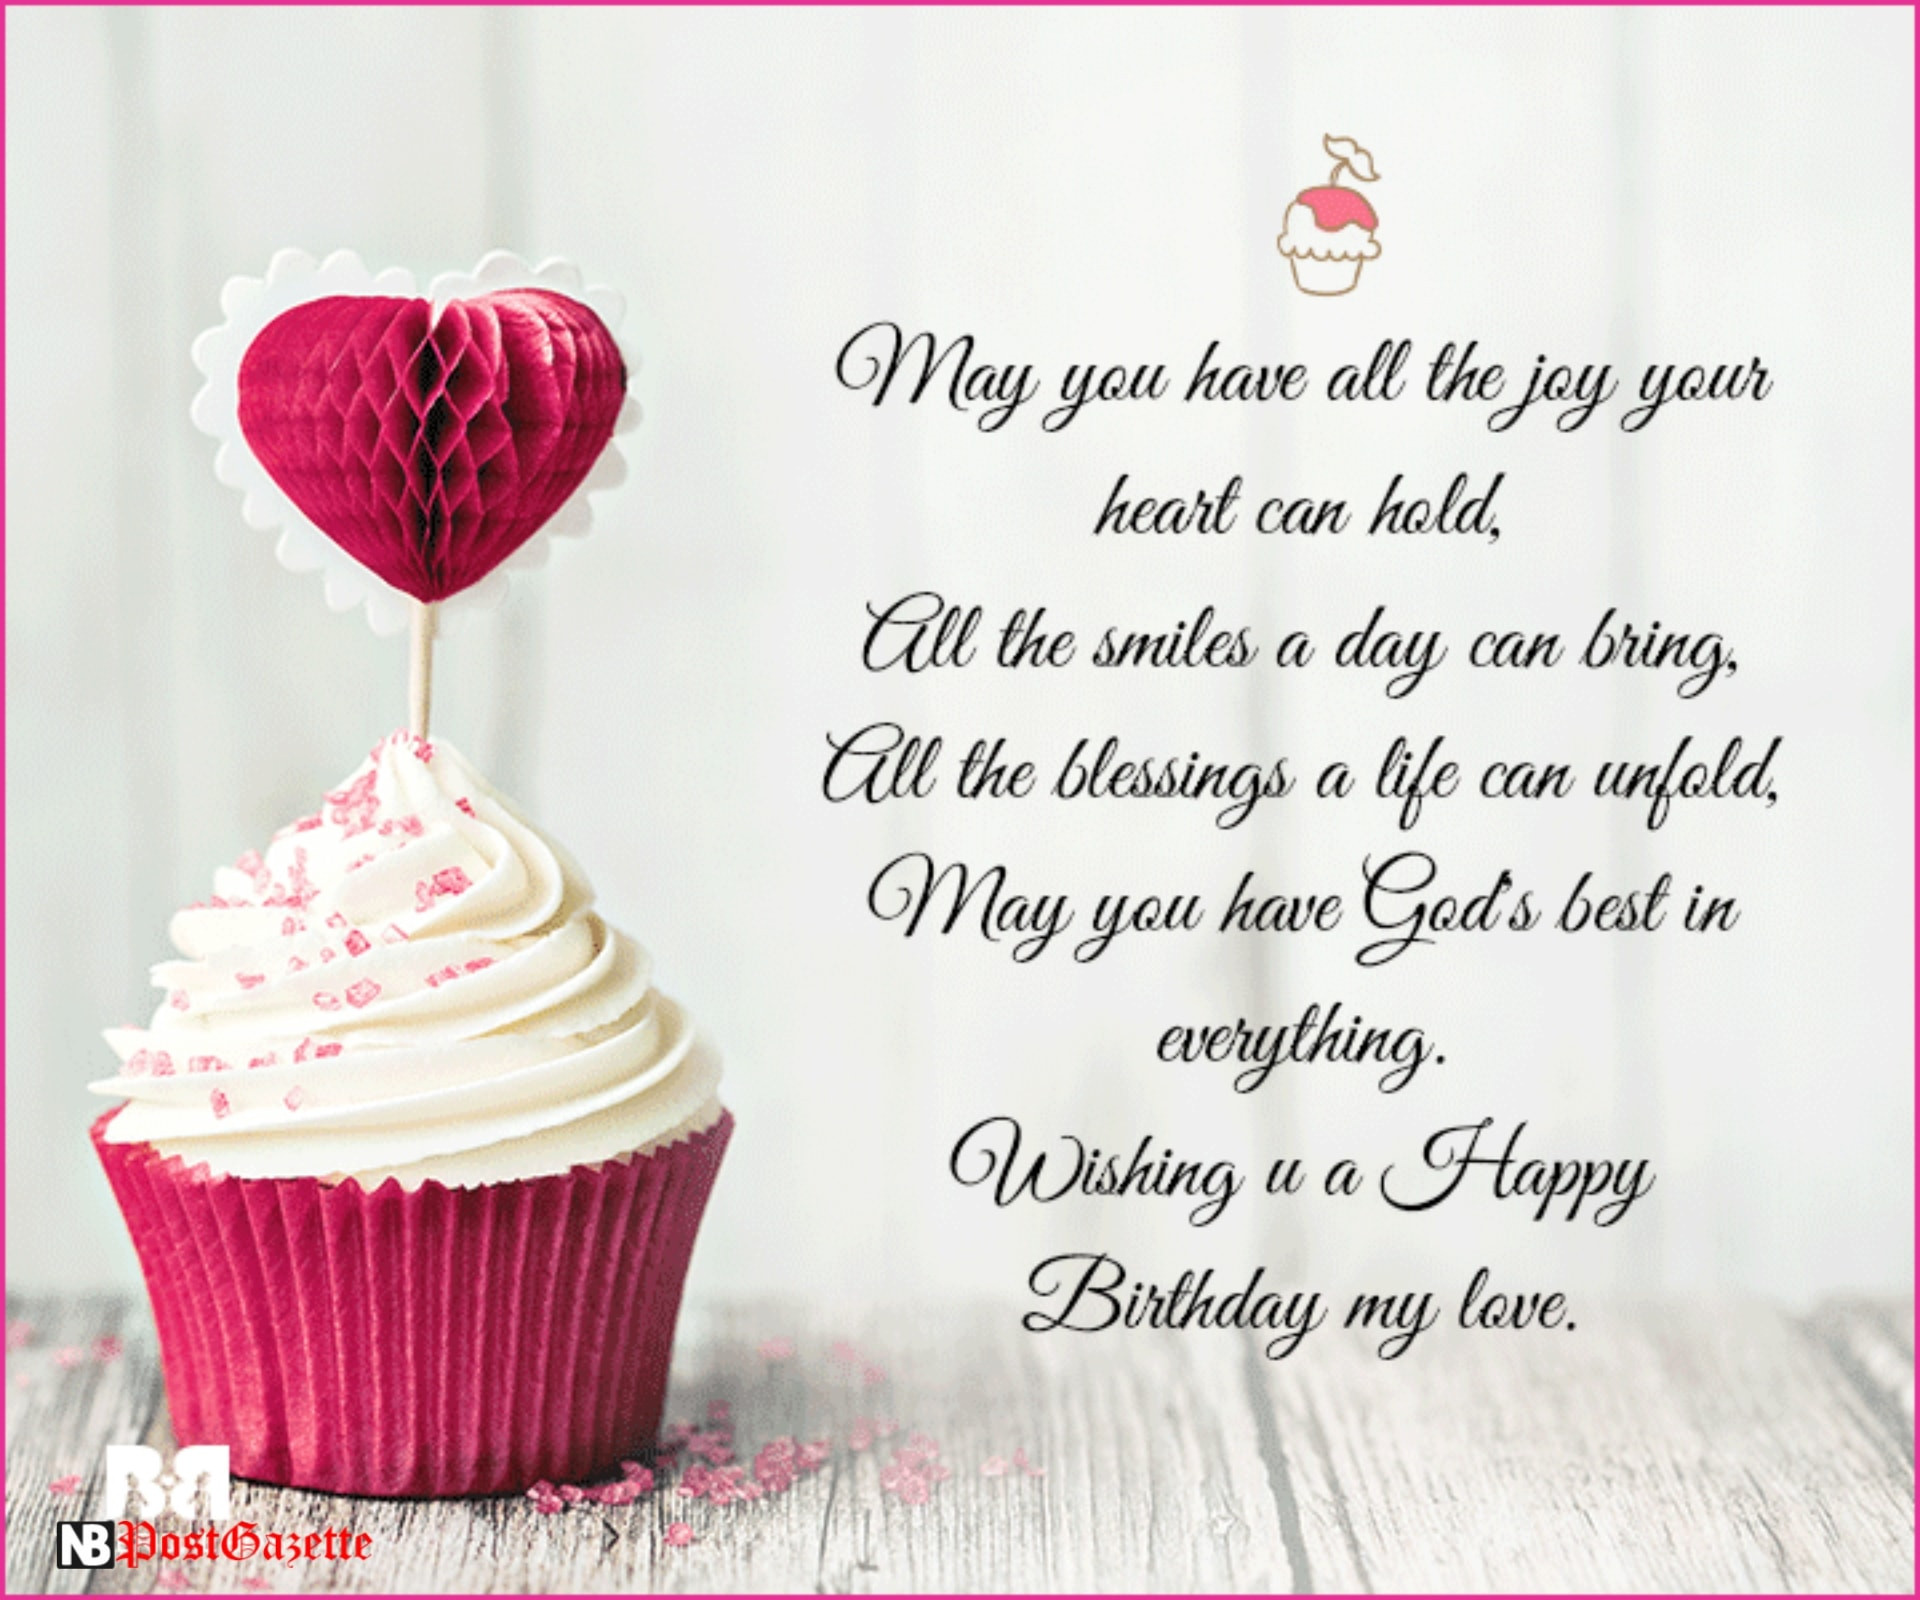 Best Birthday Wishes Quotes
 Top Best Happy Birthday Wishes SMS Quotes & Text Messages